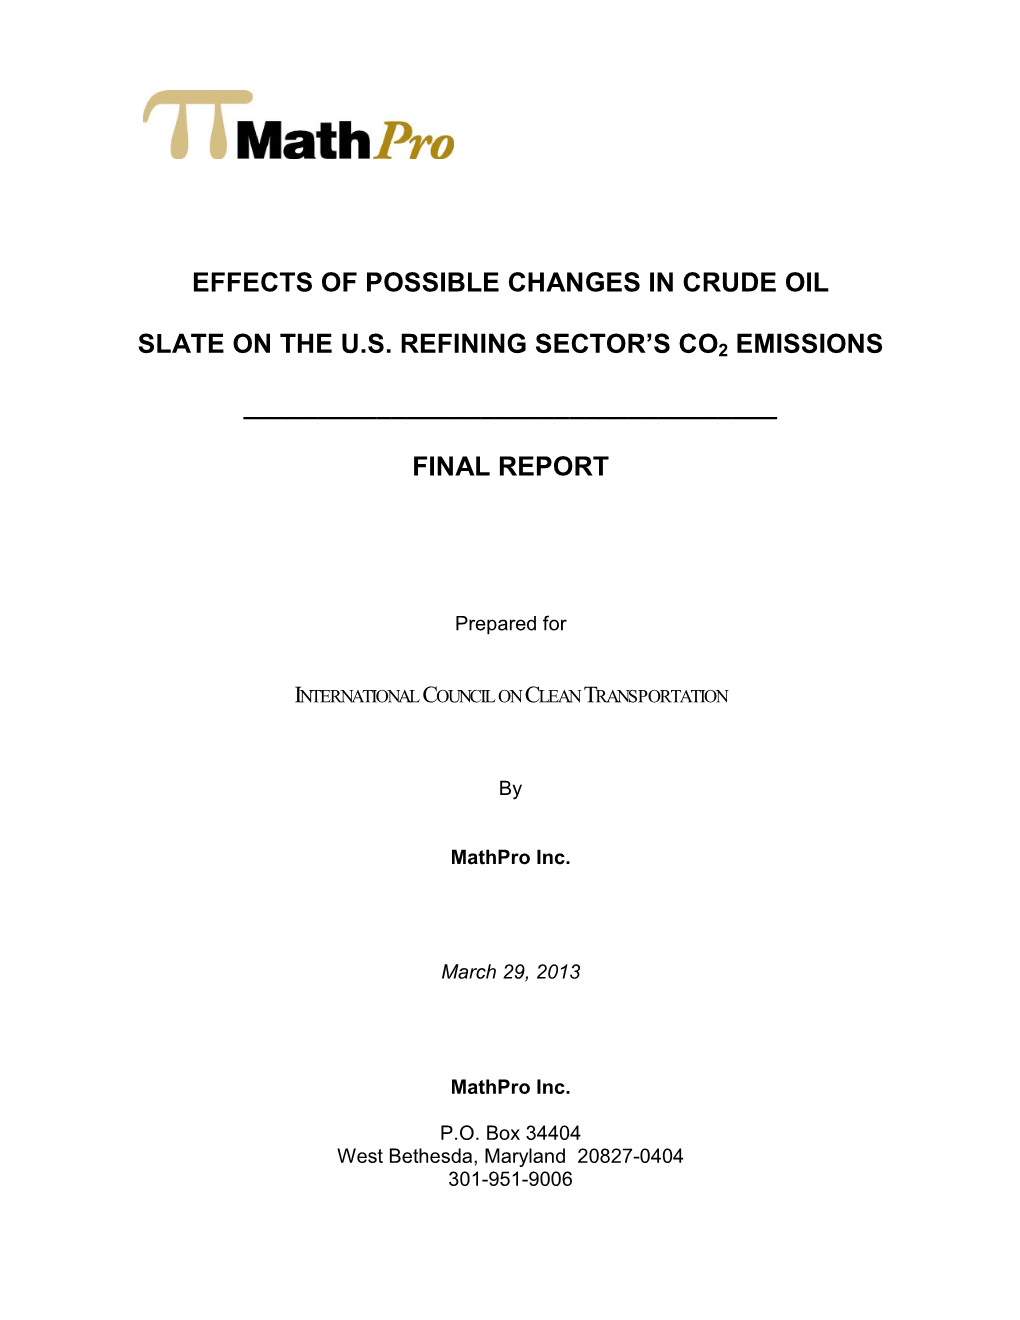 Effects of Possible Changes in Crude Oil Slate on the U.S. Refining Sector's